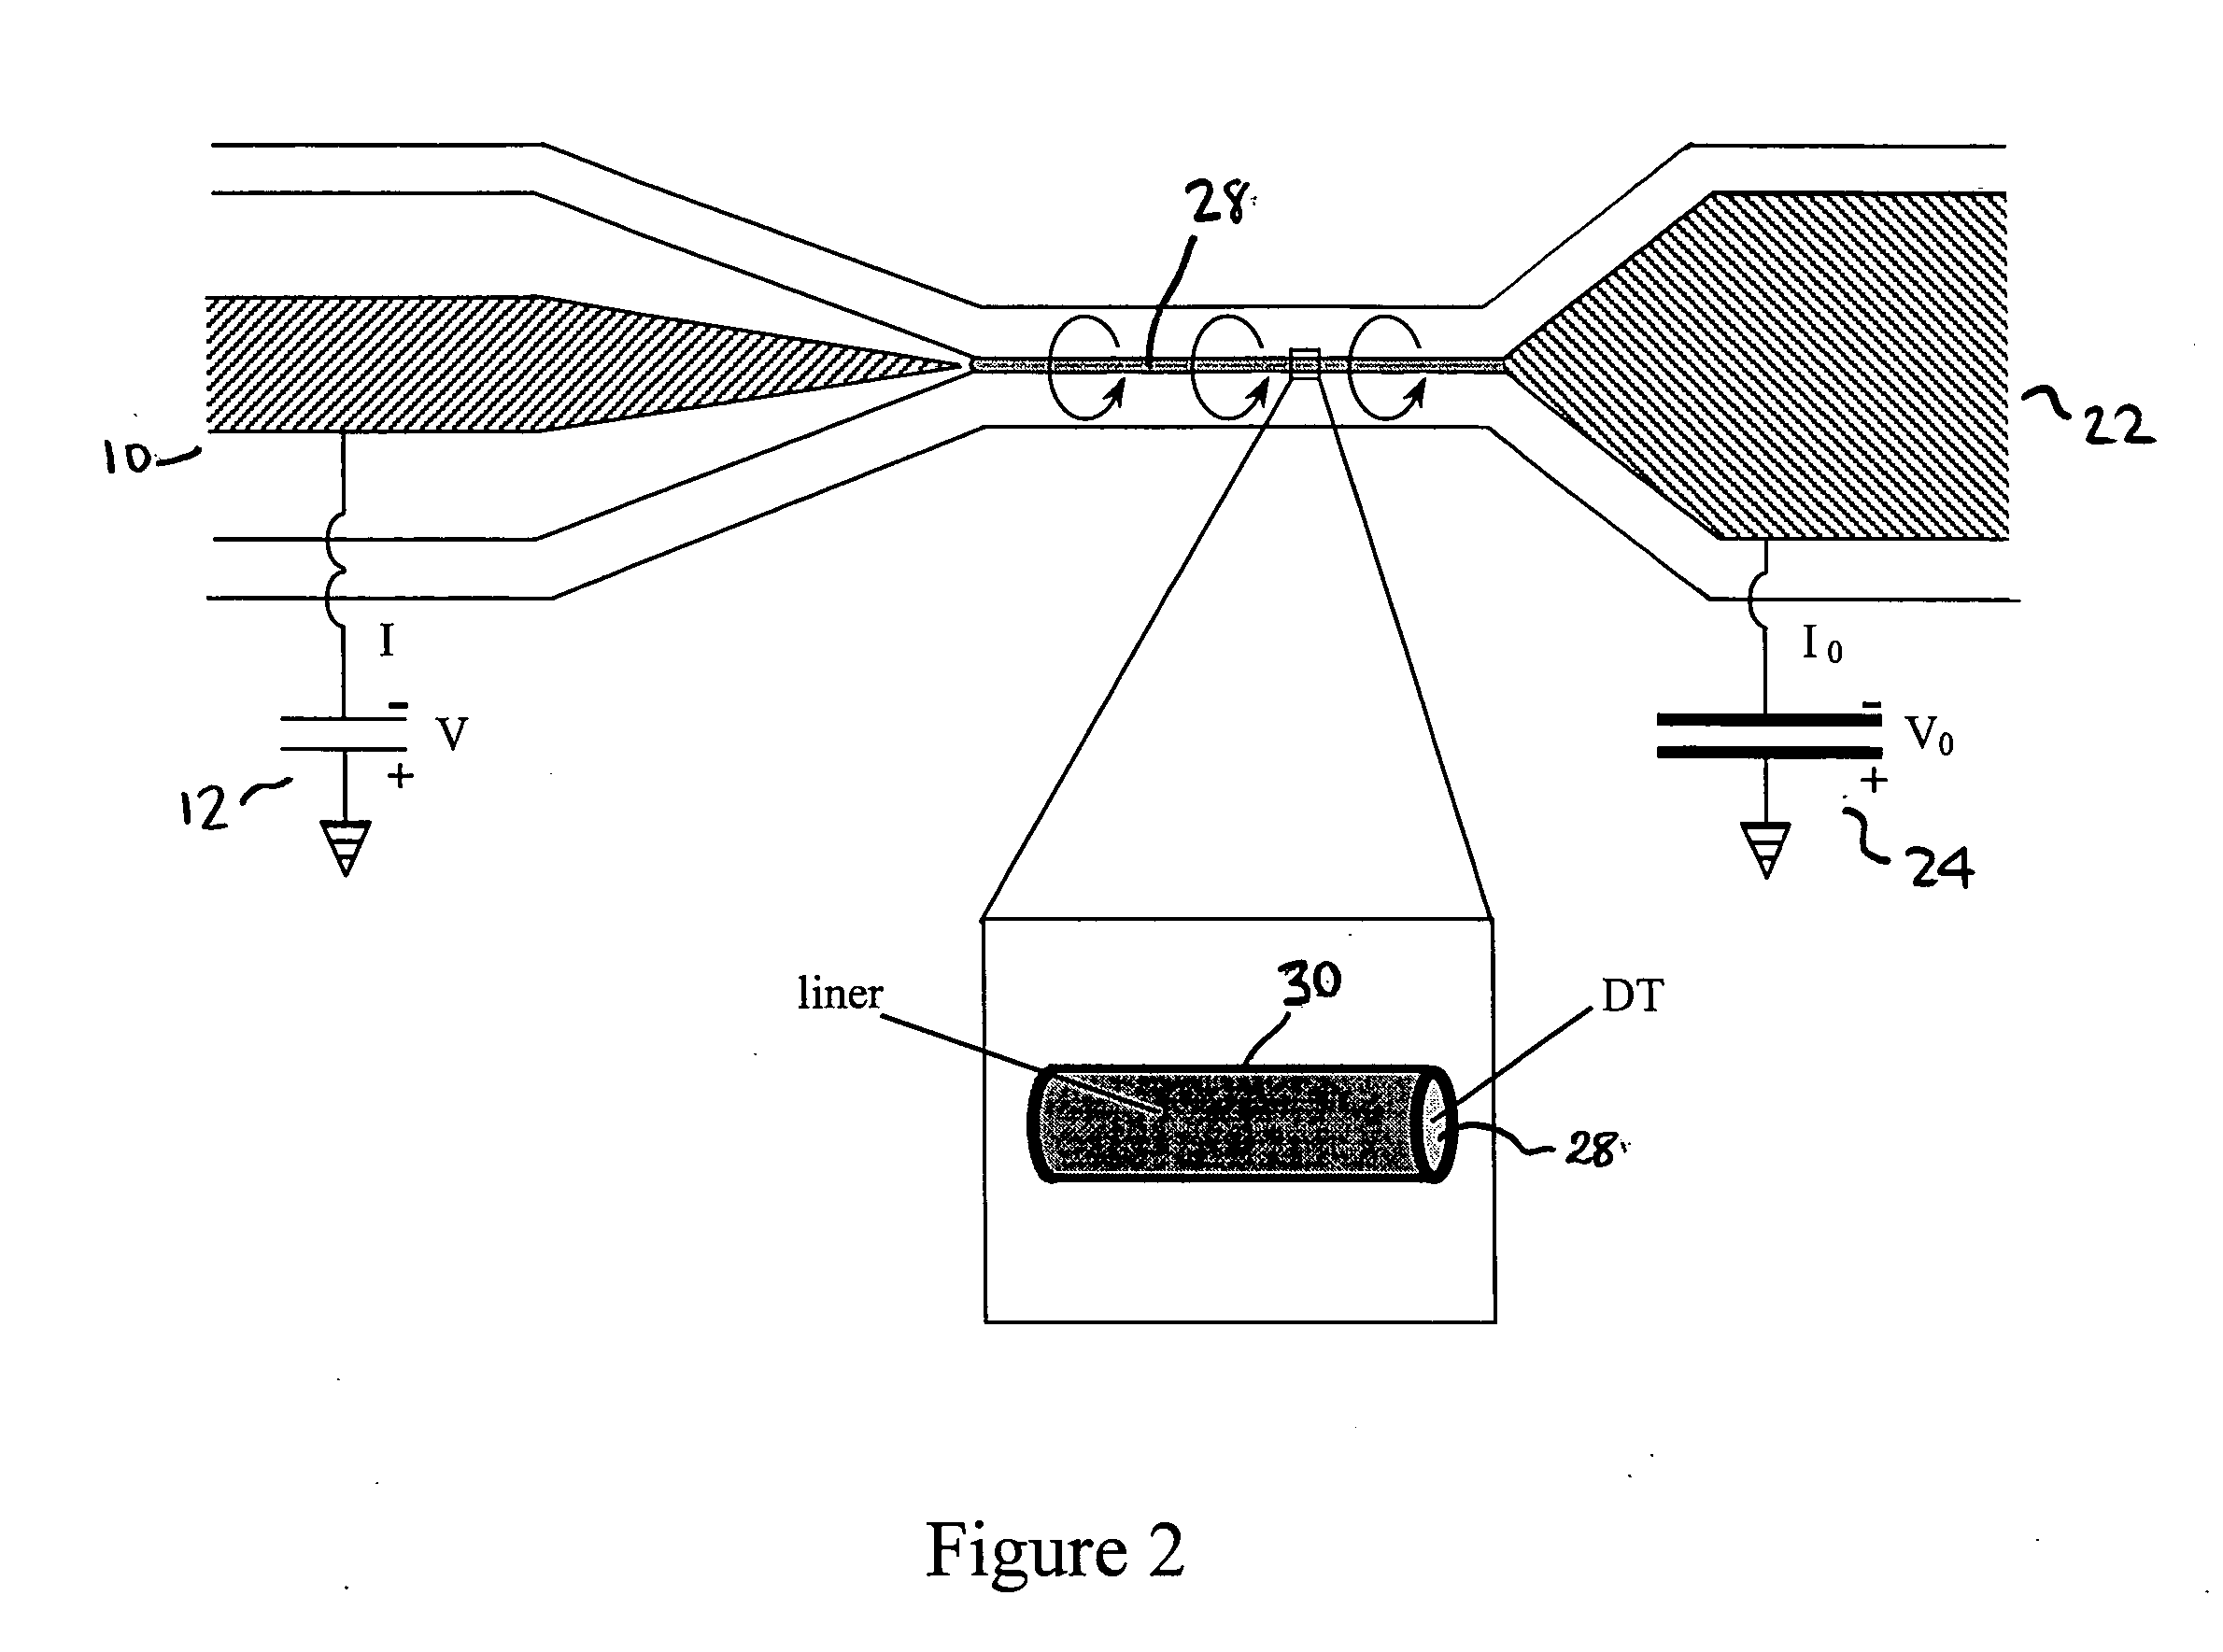 Apparatus and method for ignition of high-gain thermonuclear microexplosions with electric-pulse power